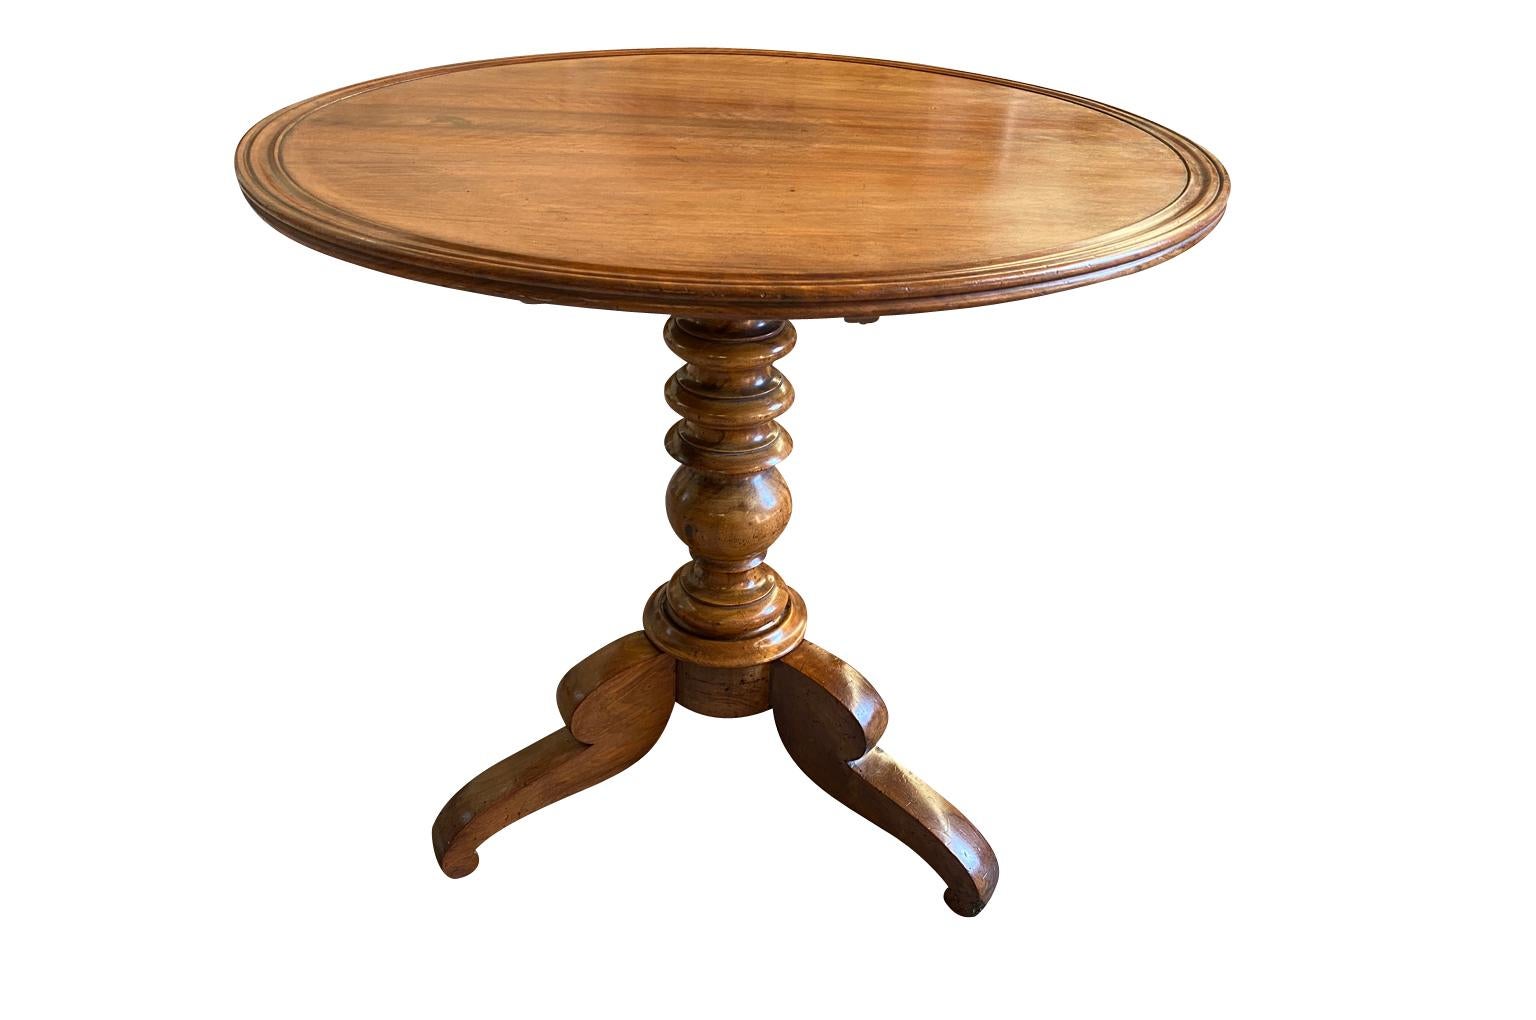 A very handsome later 19th century Louis Philippe style Gueridon constructed from beautiful walnut with a wonderful edge finish to the tilt top plateau and a nicely turned pedestal. Beautiful patina.